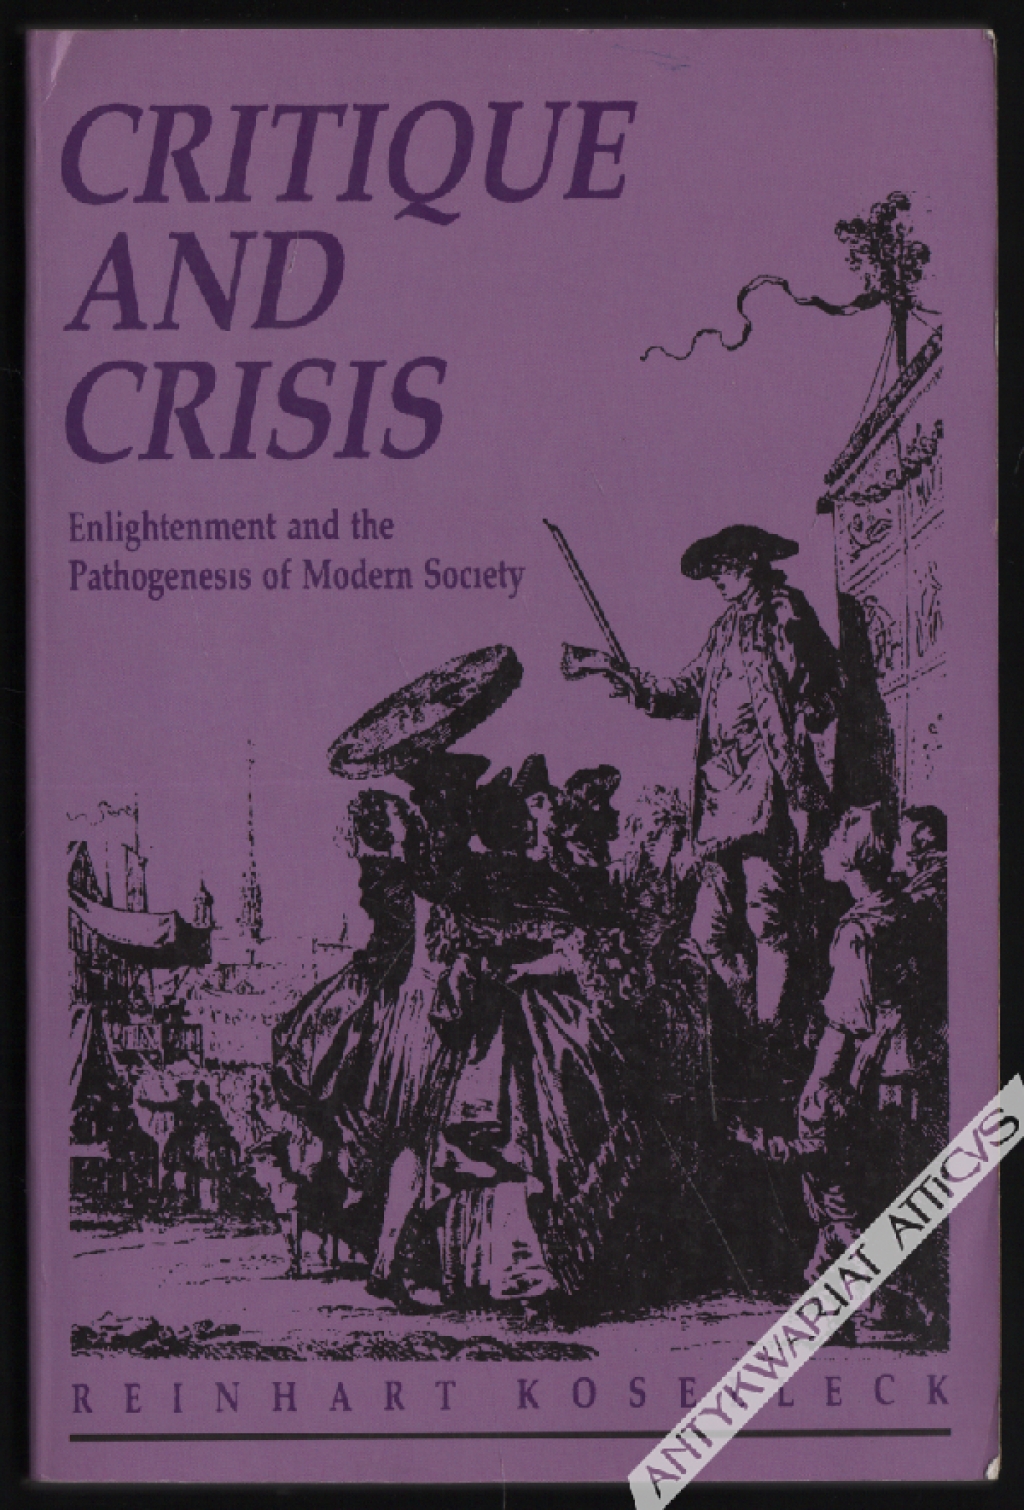 Critique and Crisis. Enlightenment and the Pathogenesis of Modern Society